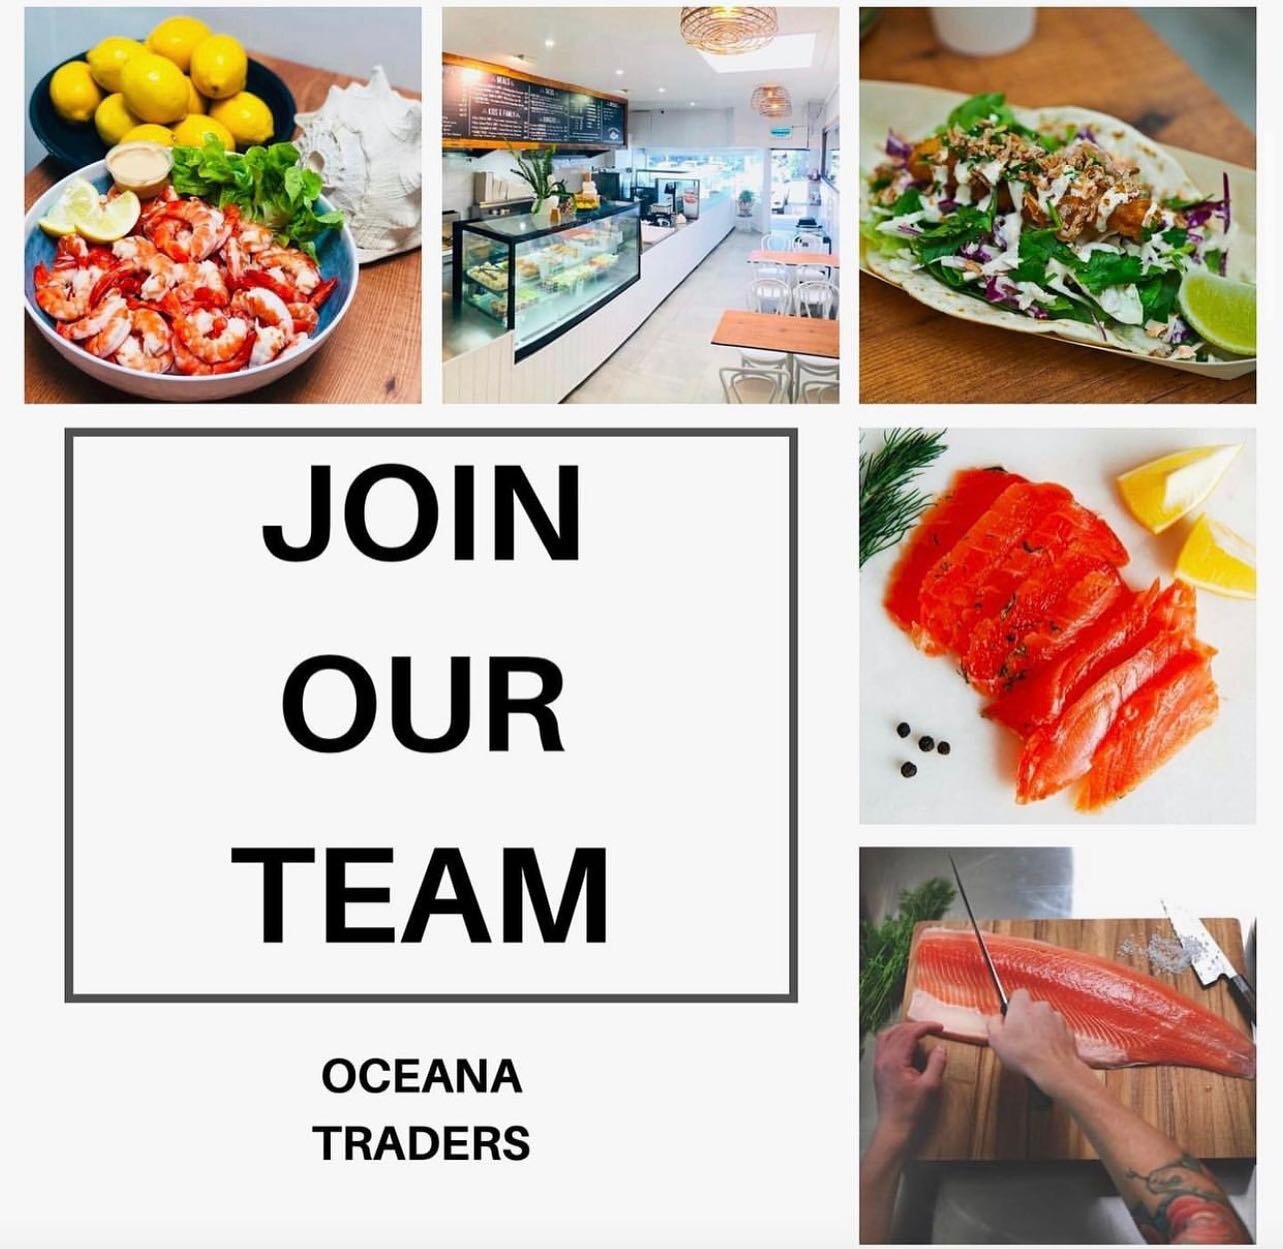 Looking for kitchen hands and front of house staff.  After school work and weekend work available. Come by and drop a resume in. Or email us at Contact@oceanatraders.com.au